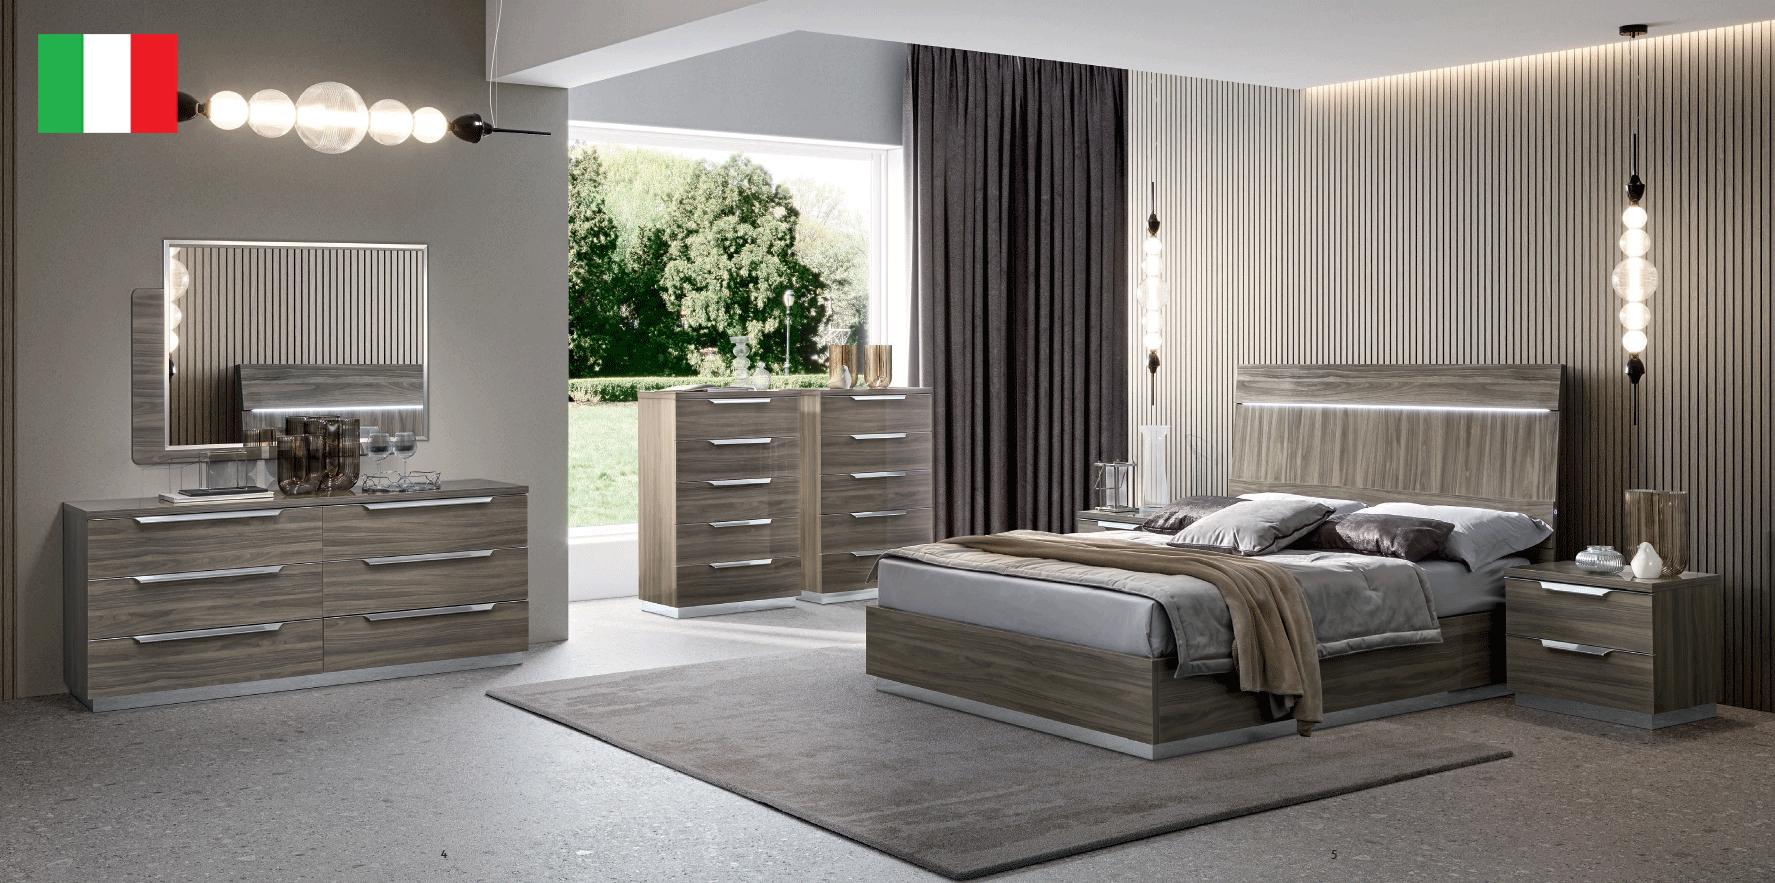 Brands Camel Classic Collection, Italy Kroma Bedroom GREY by Camelgroup – Italy